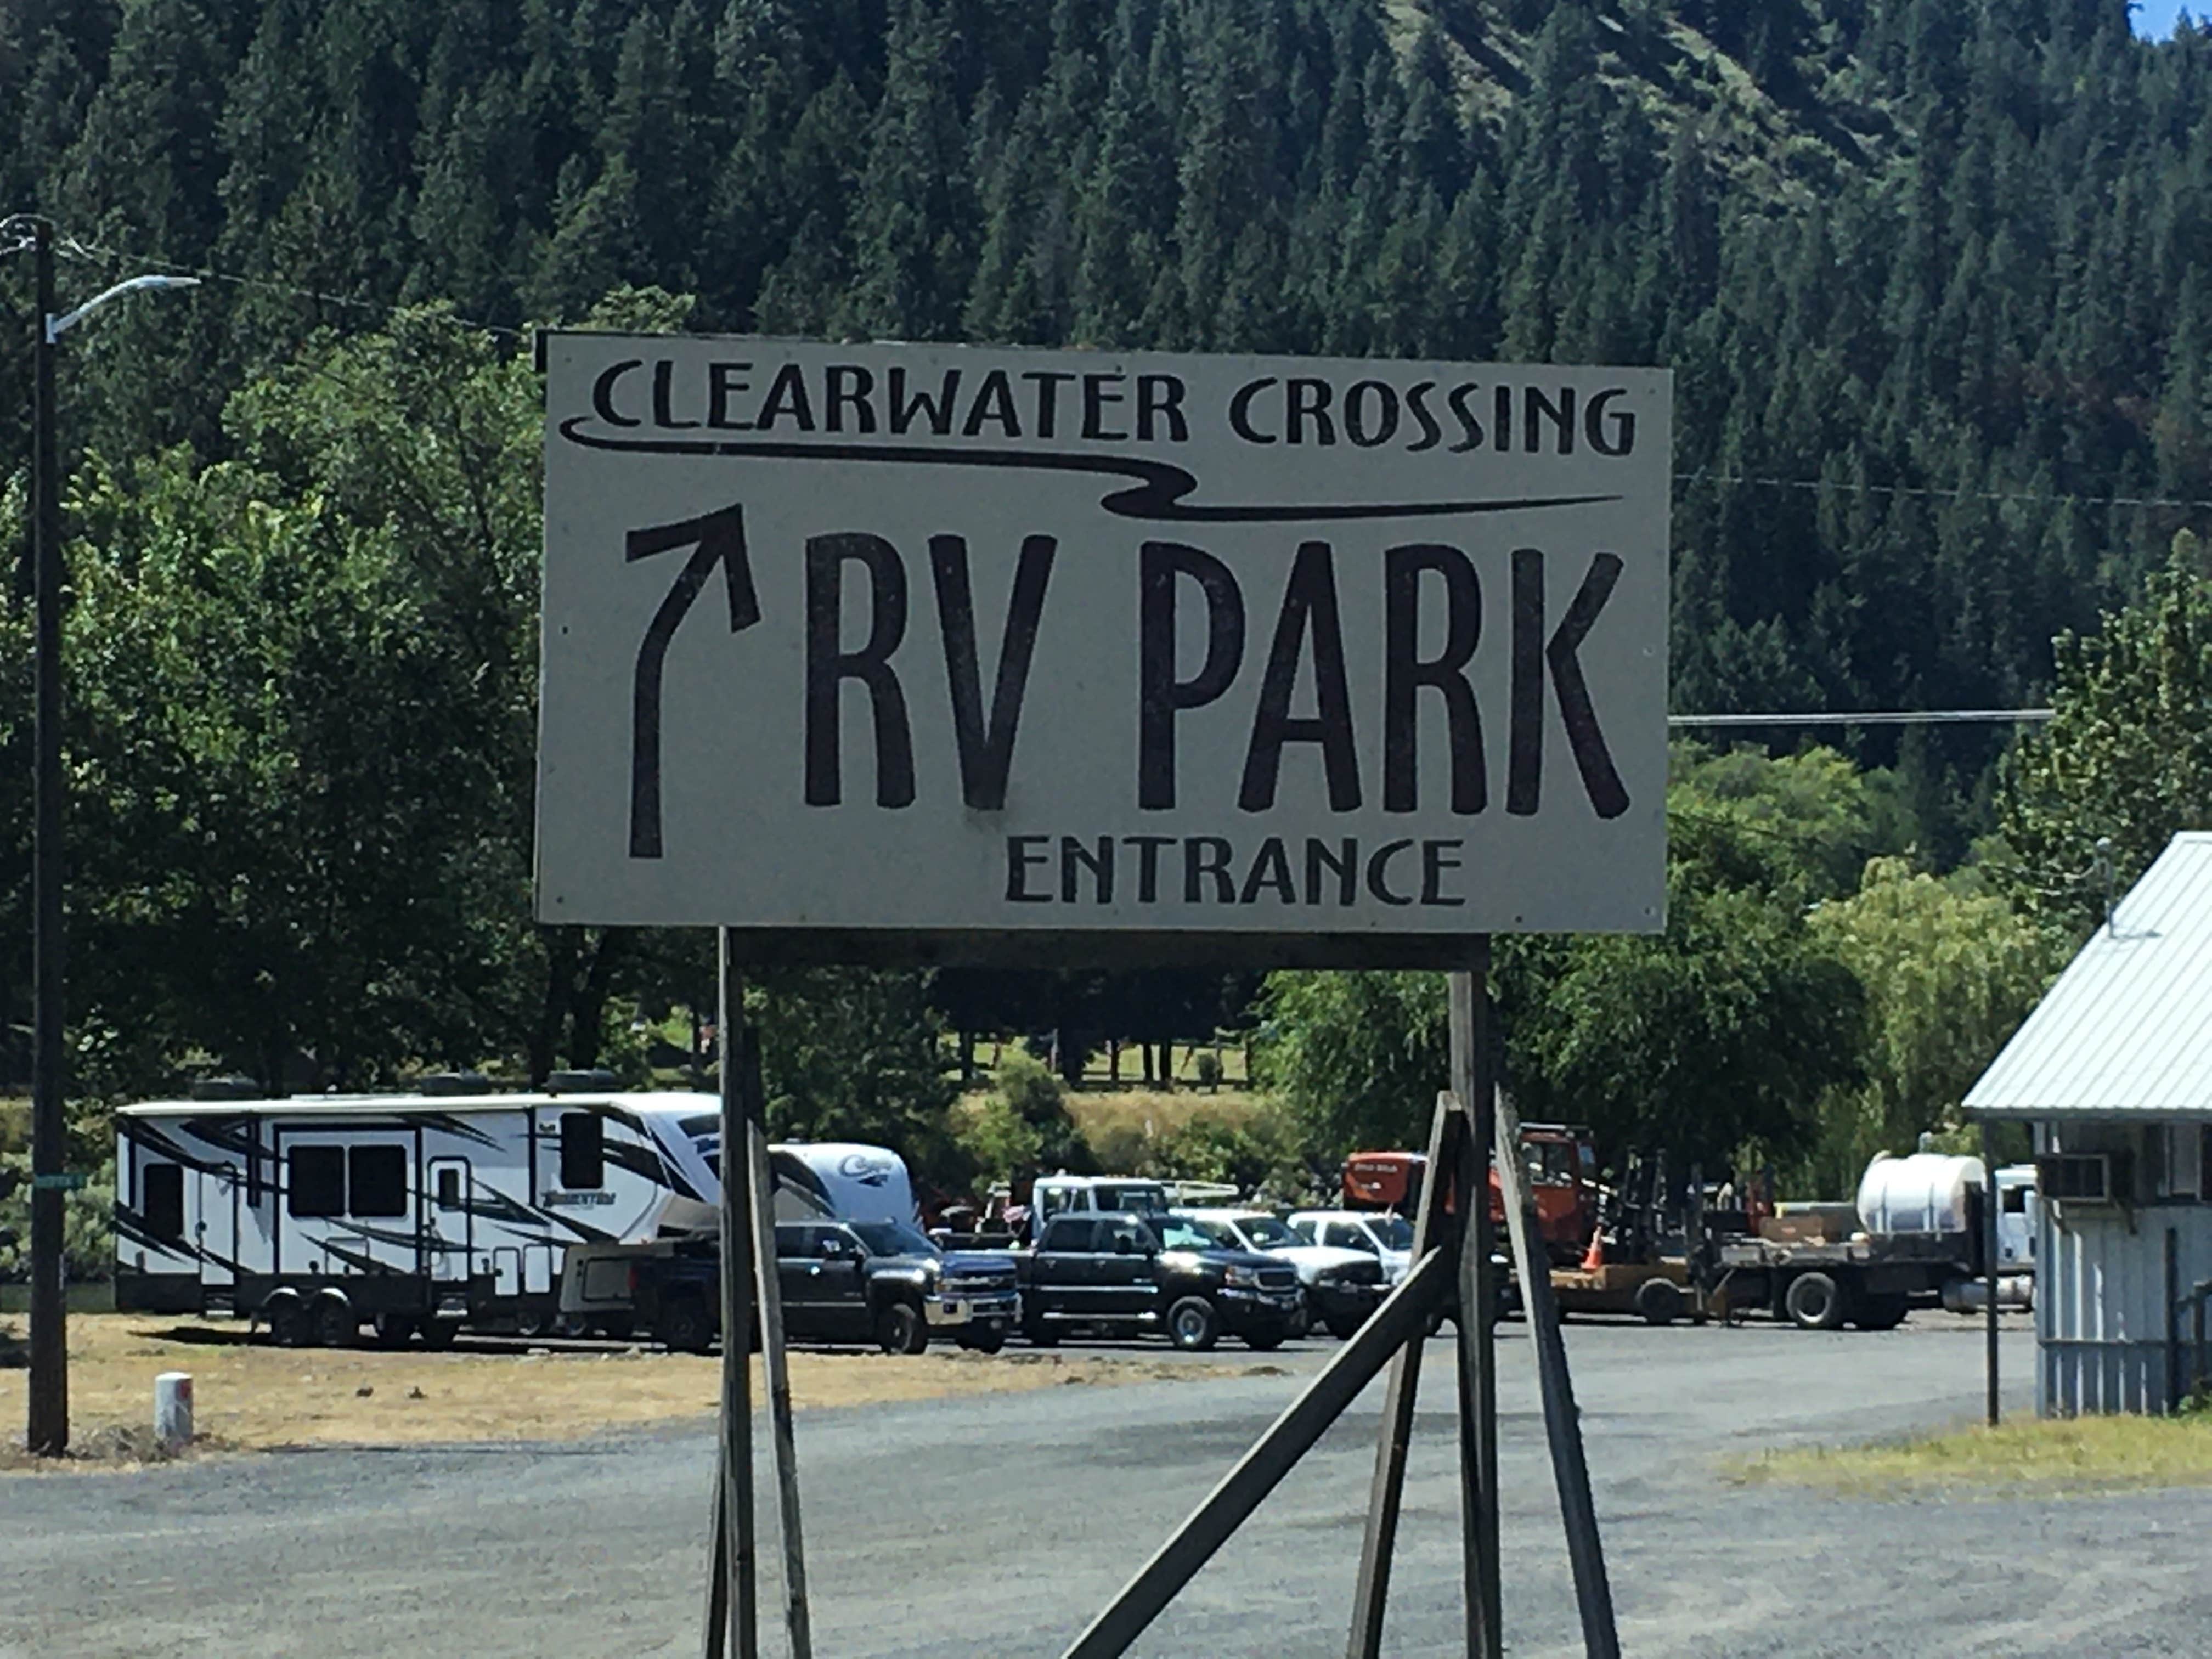 Camper submitted image from Clearwater Crossing RV Park - 4